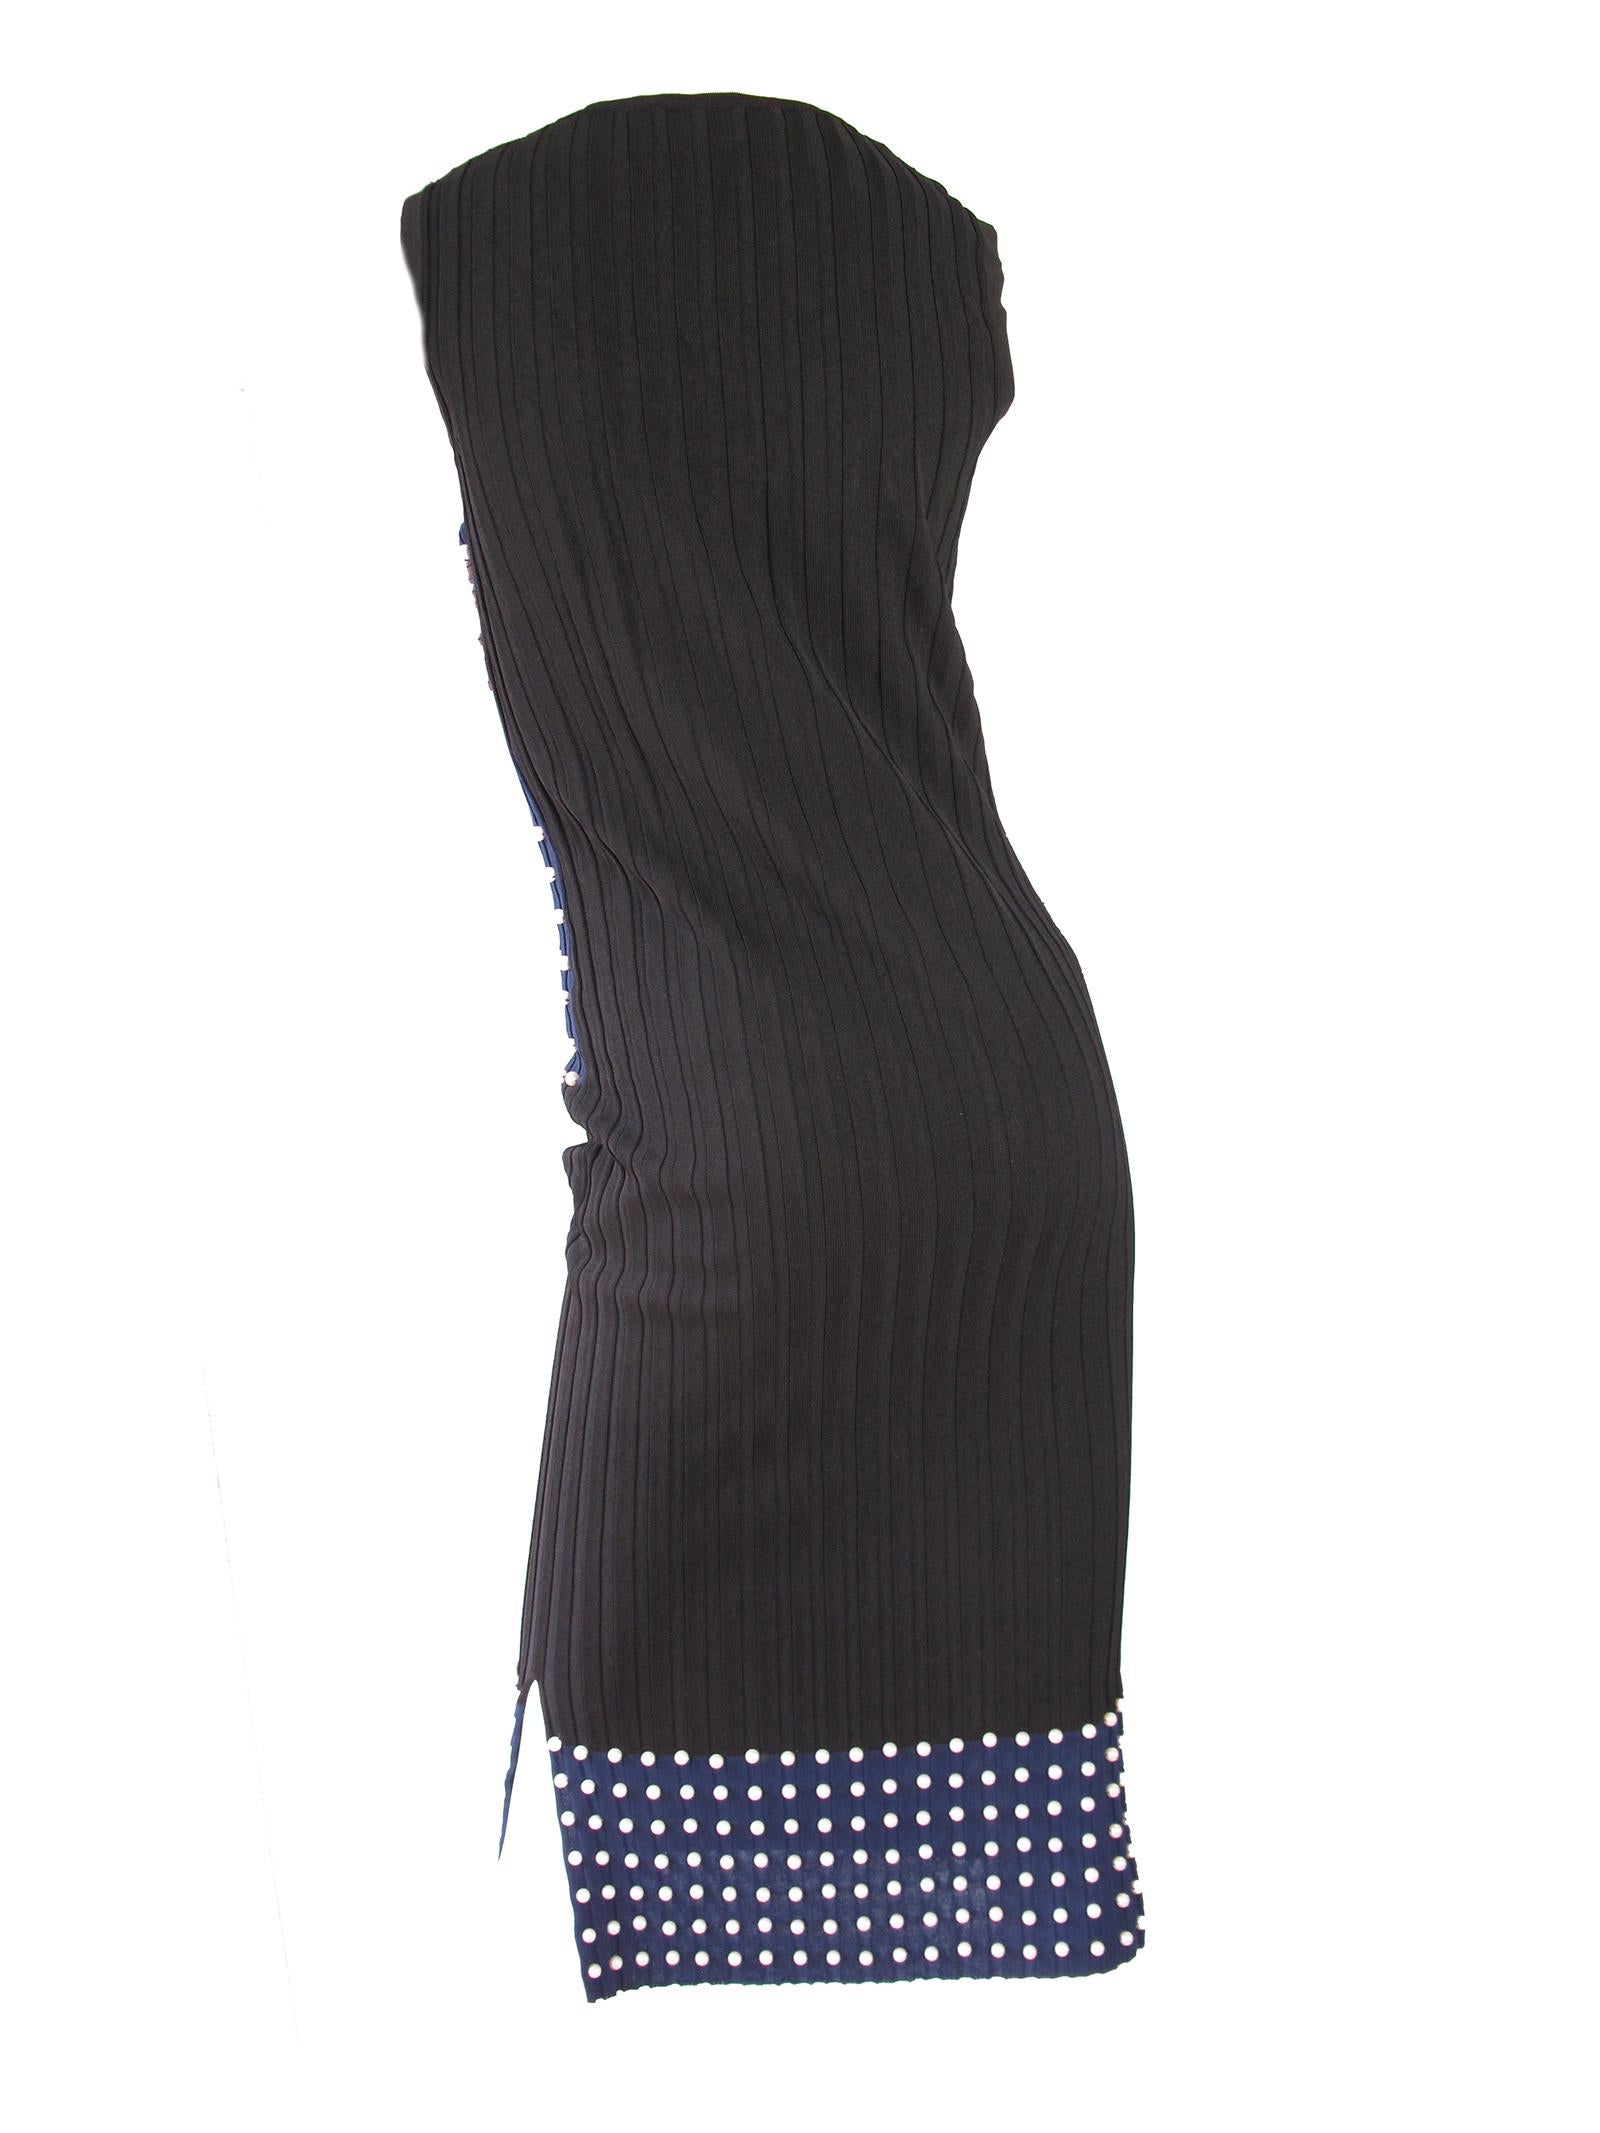 Black Emilio Pucci Knit Dress with Faux Pearls